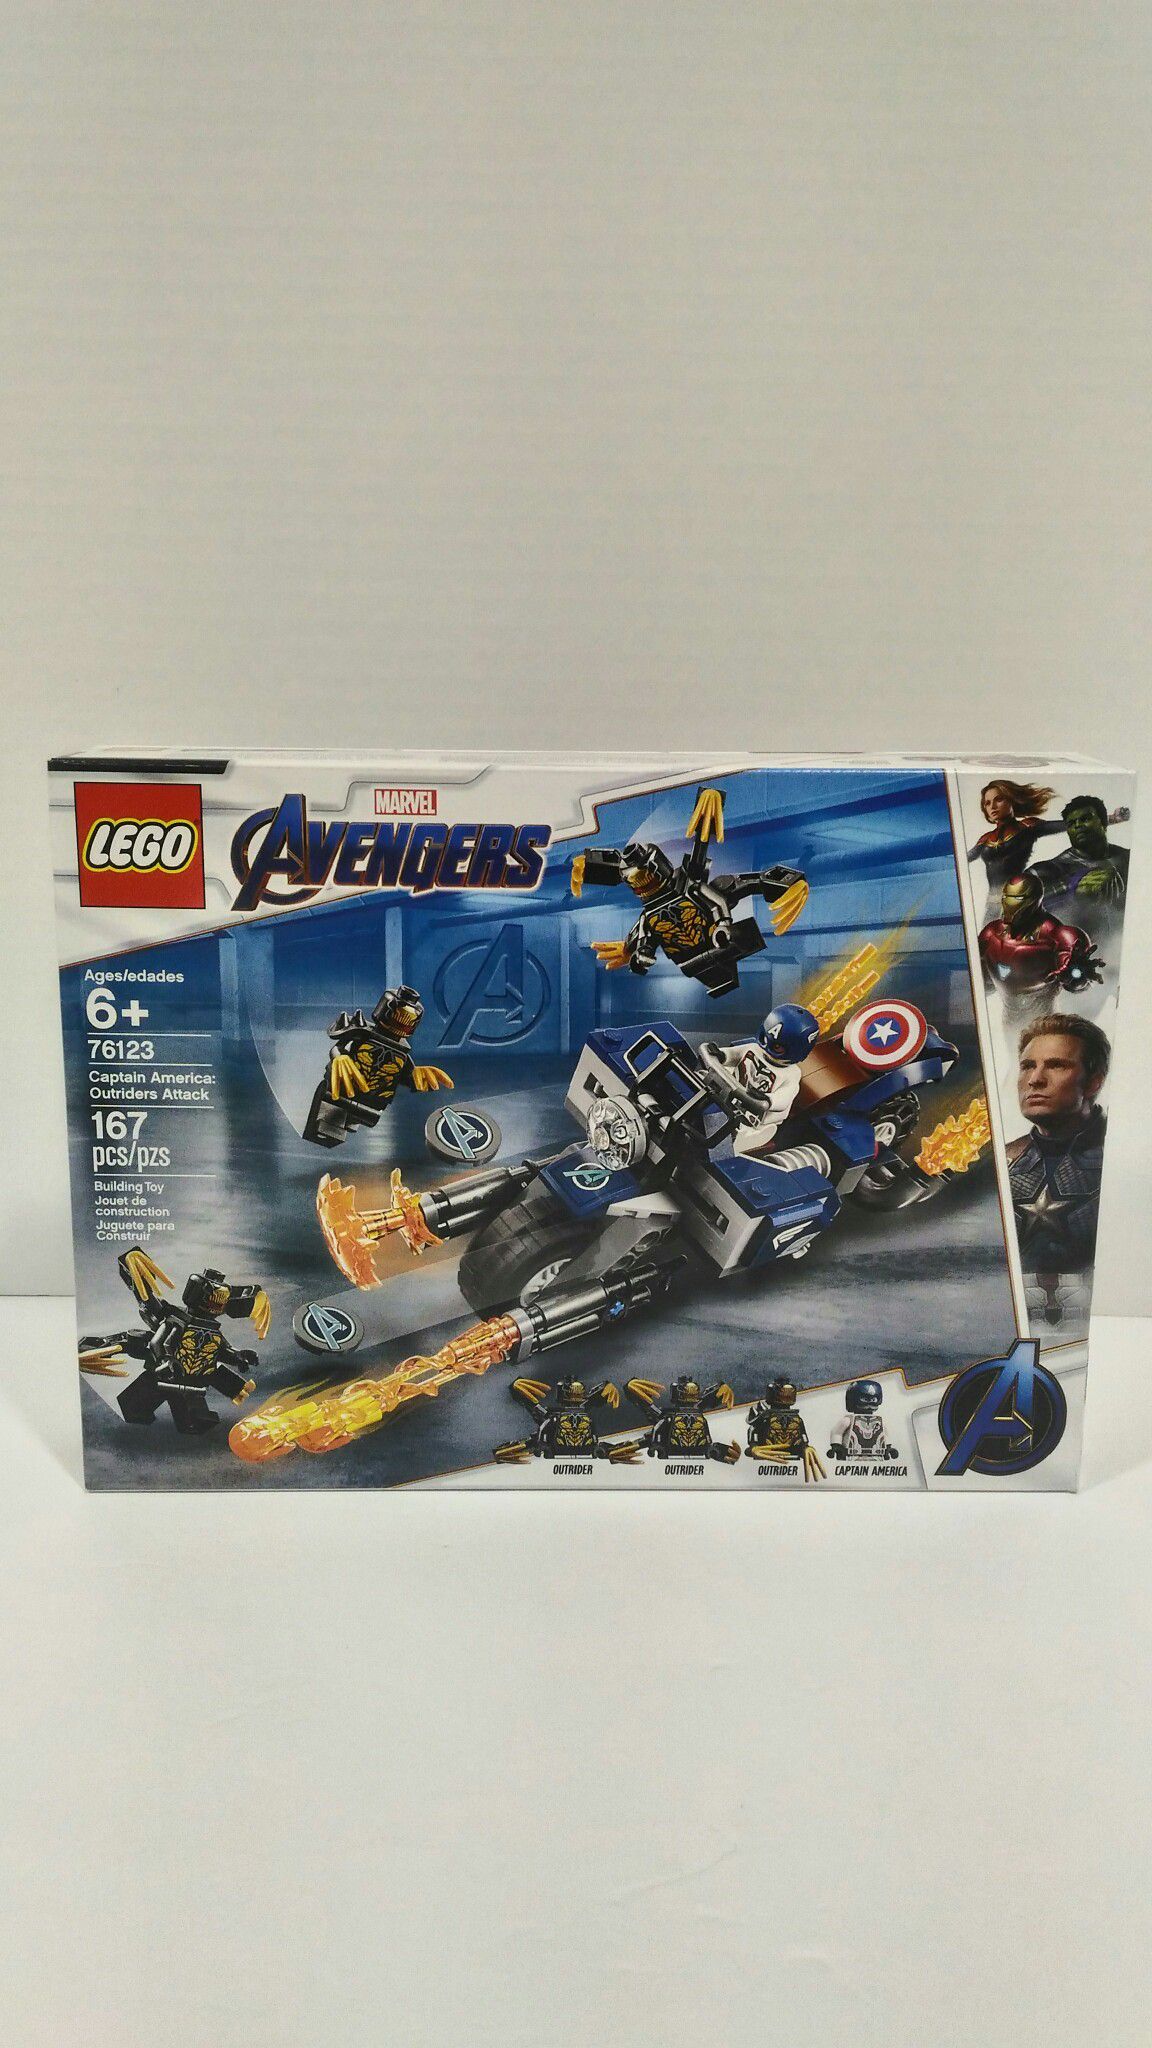 LEGO set 76123 "Captain America: outsiders Attack" brand new 20% off!!